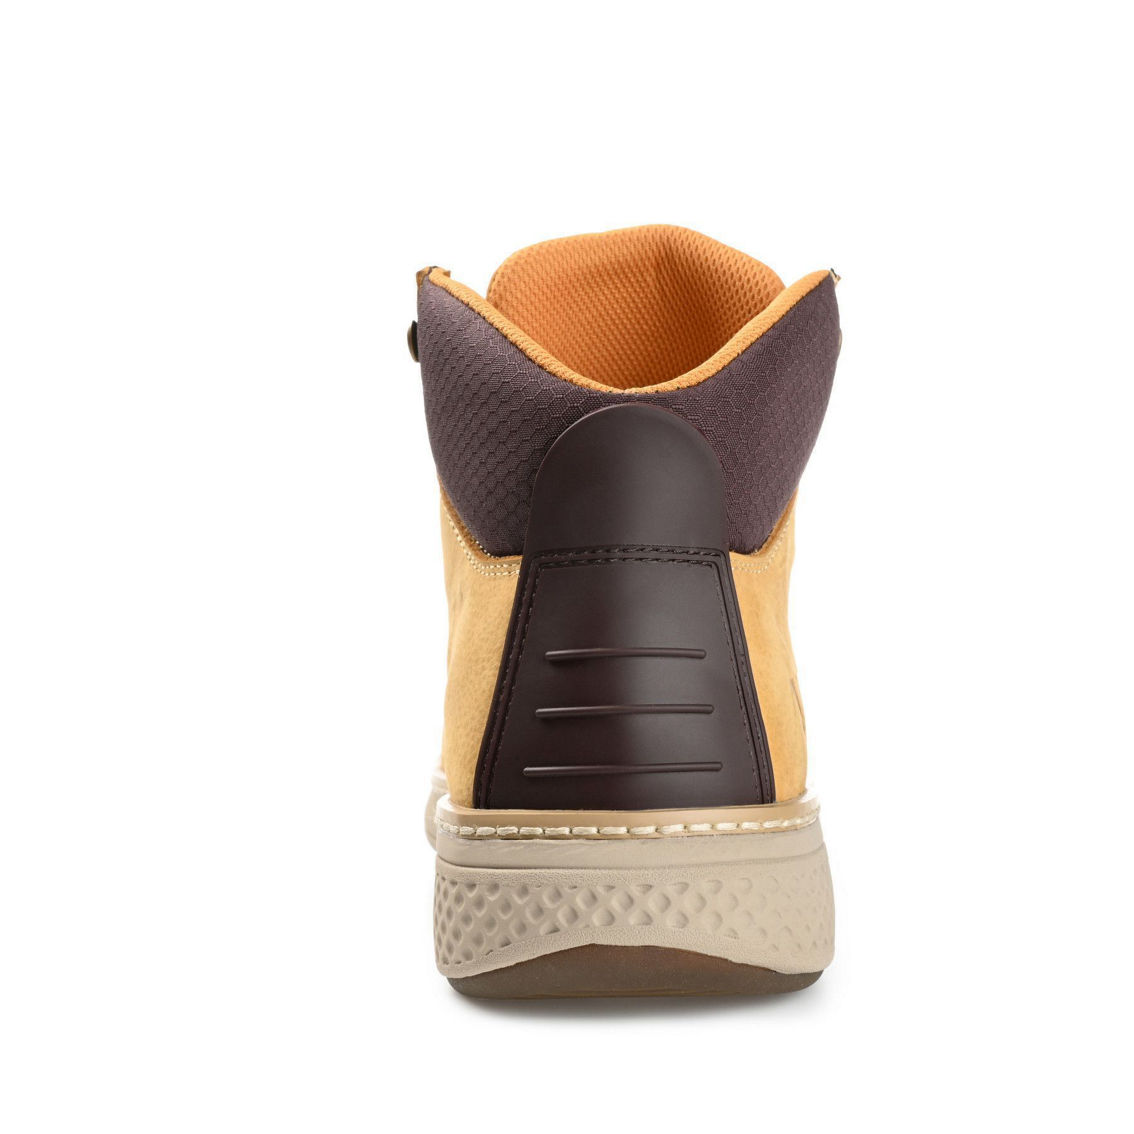 Territory Compass Ankle Boot - Image 3 of 4